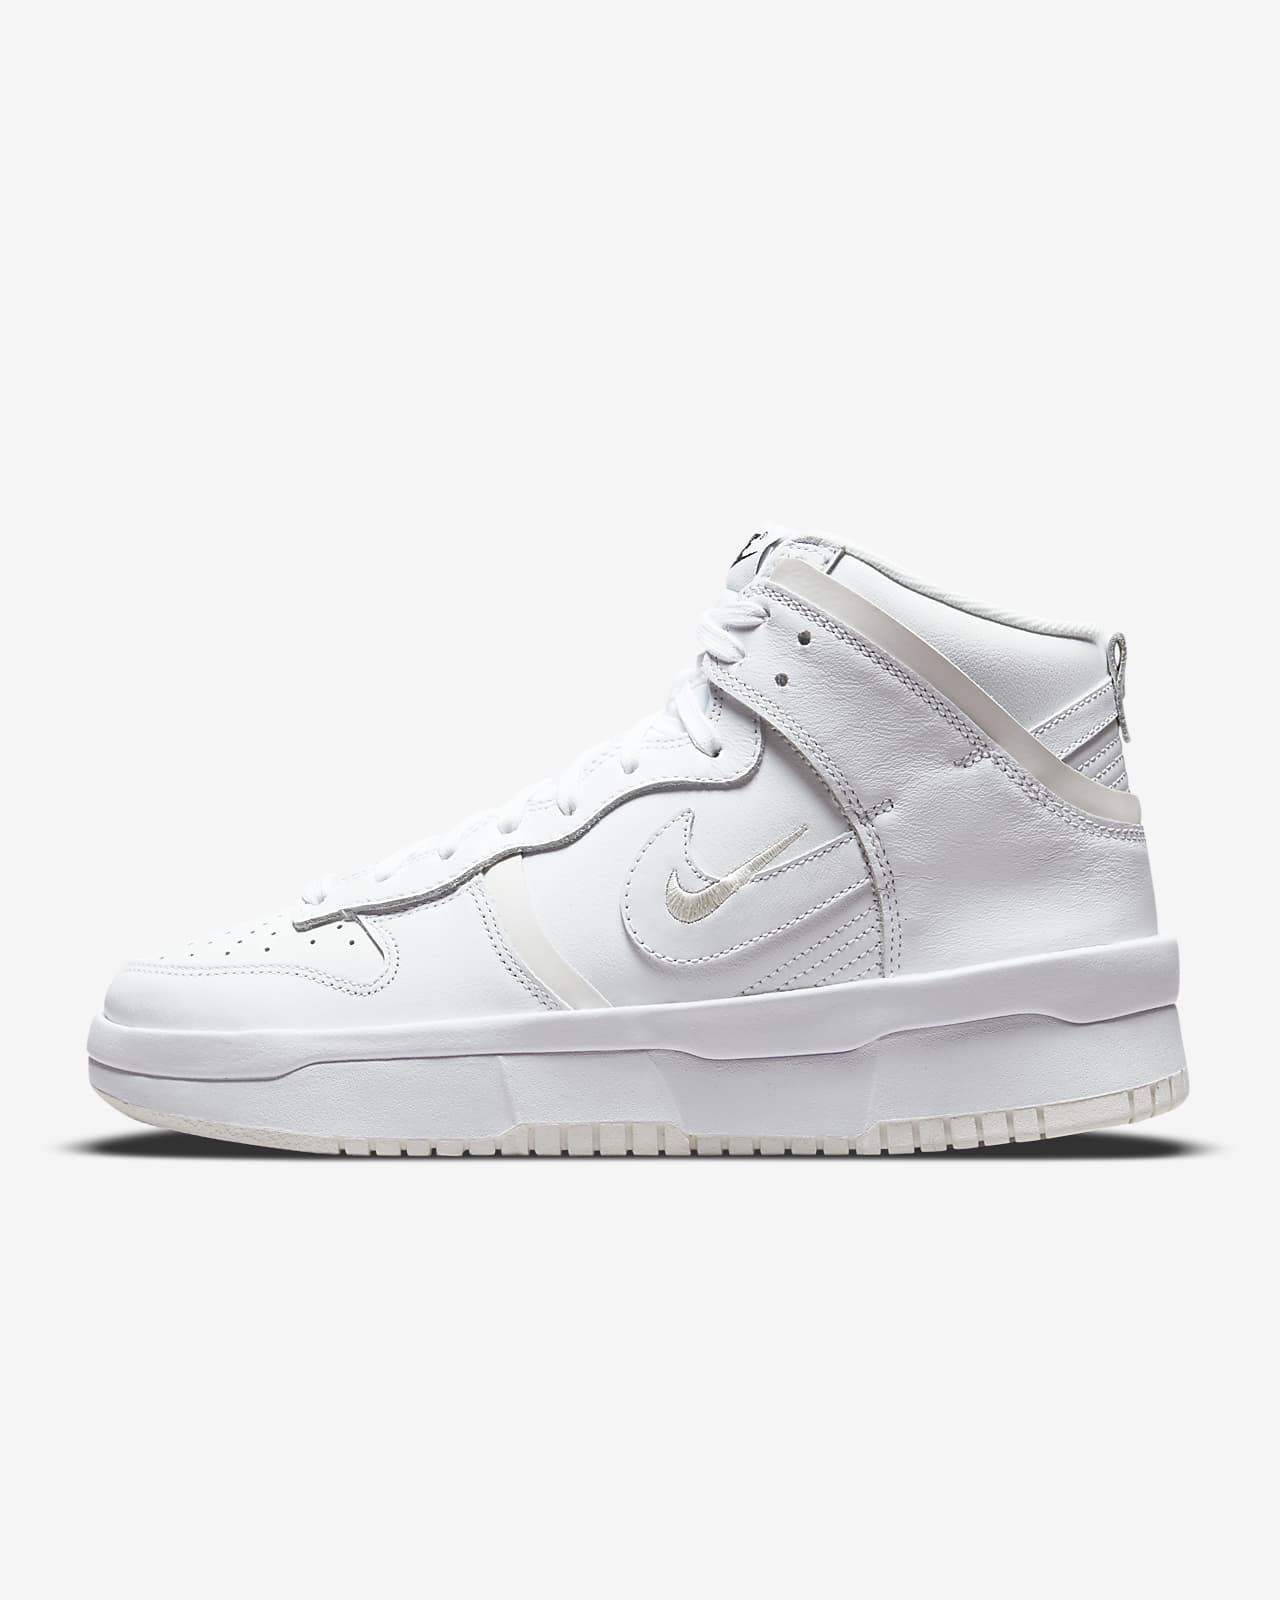 Chaussures Nike Dunk High Up pour Femme